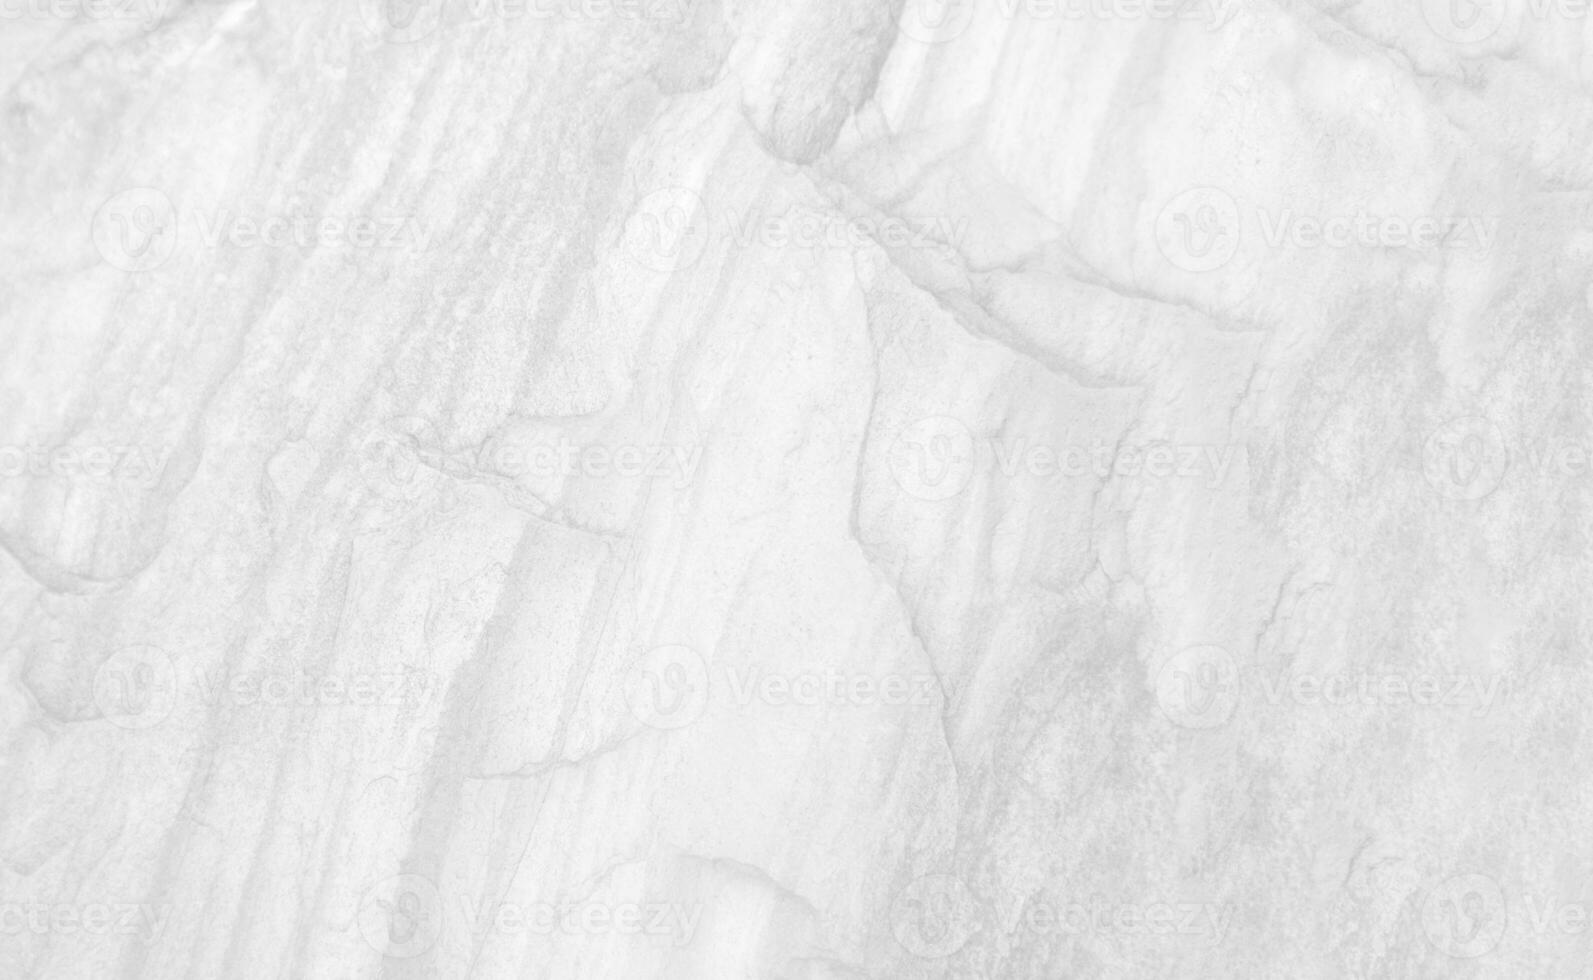 Surface of the White stone texture rough, gray-white tone. Use this for wallpaper or background image. There is a blank space for text. photo